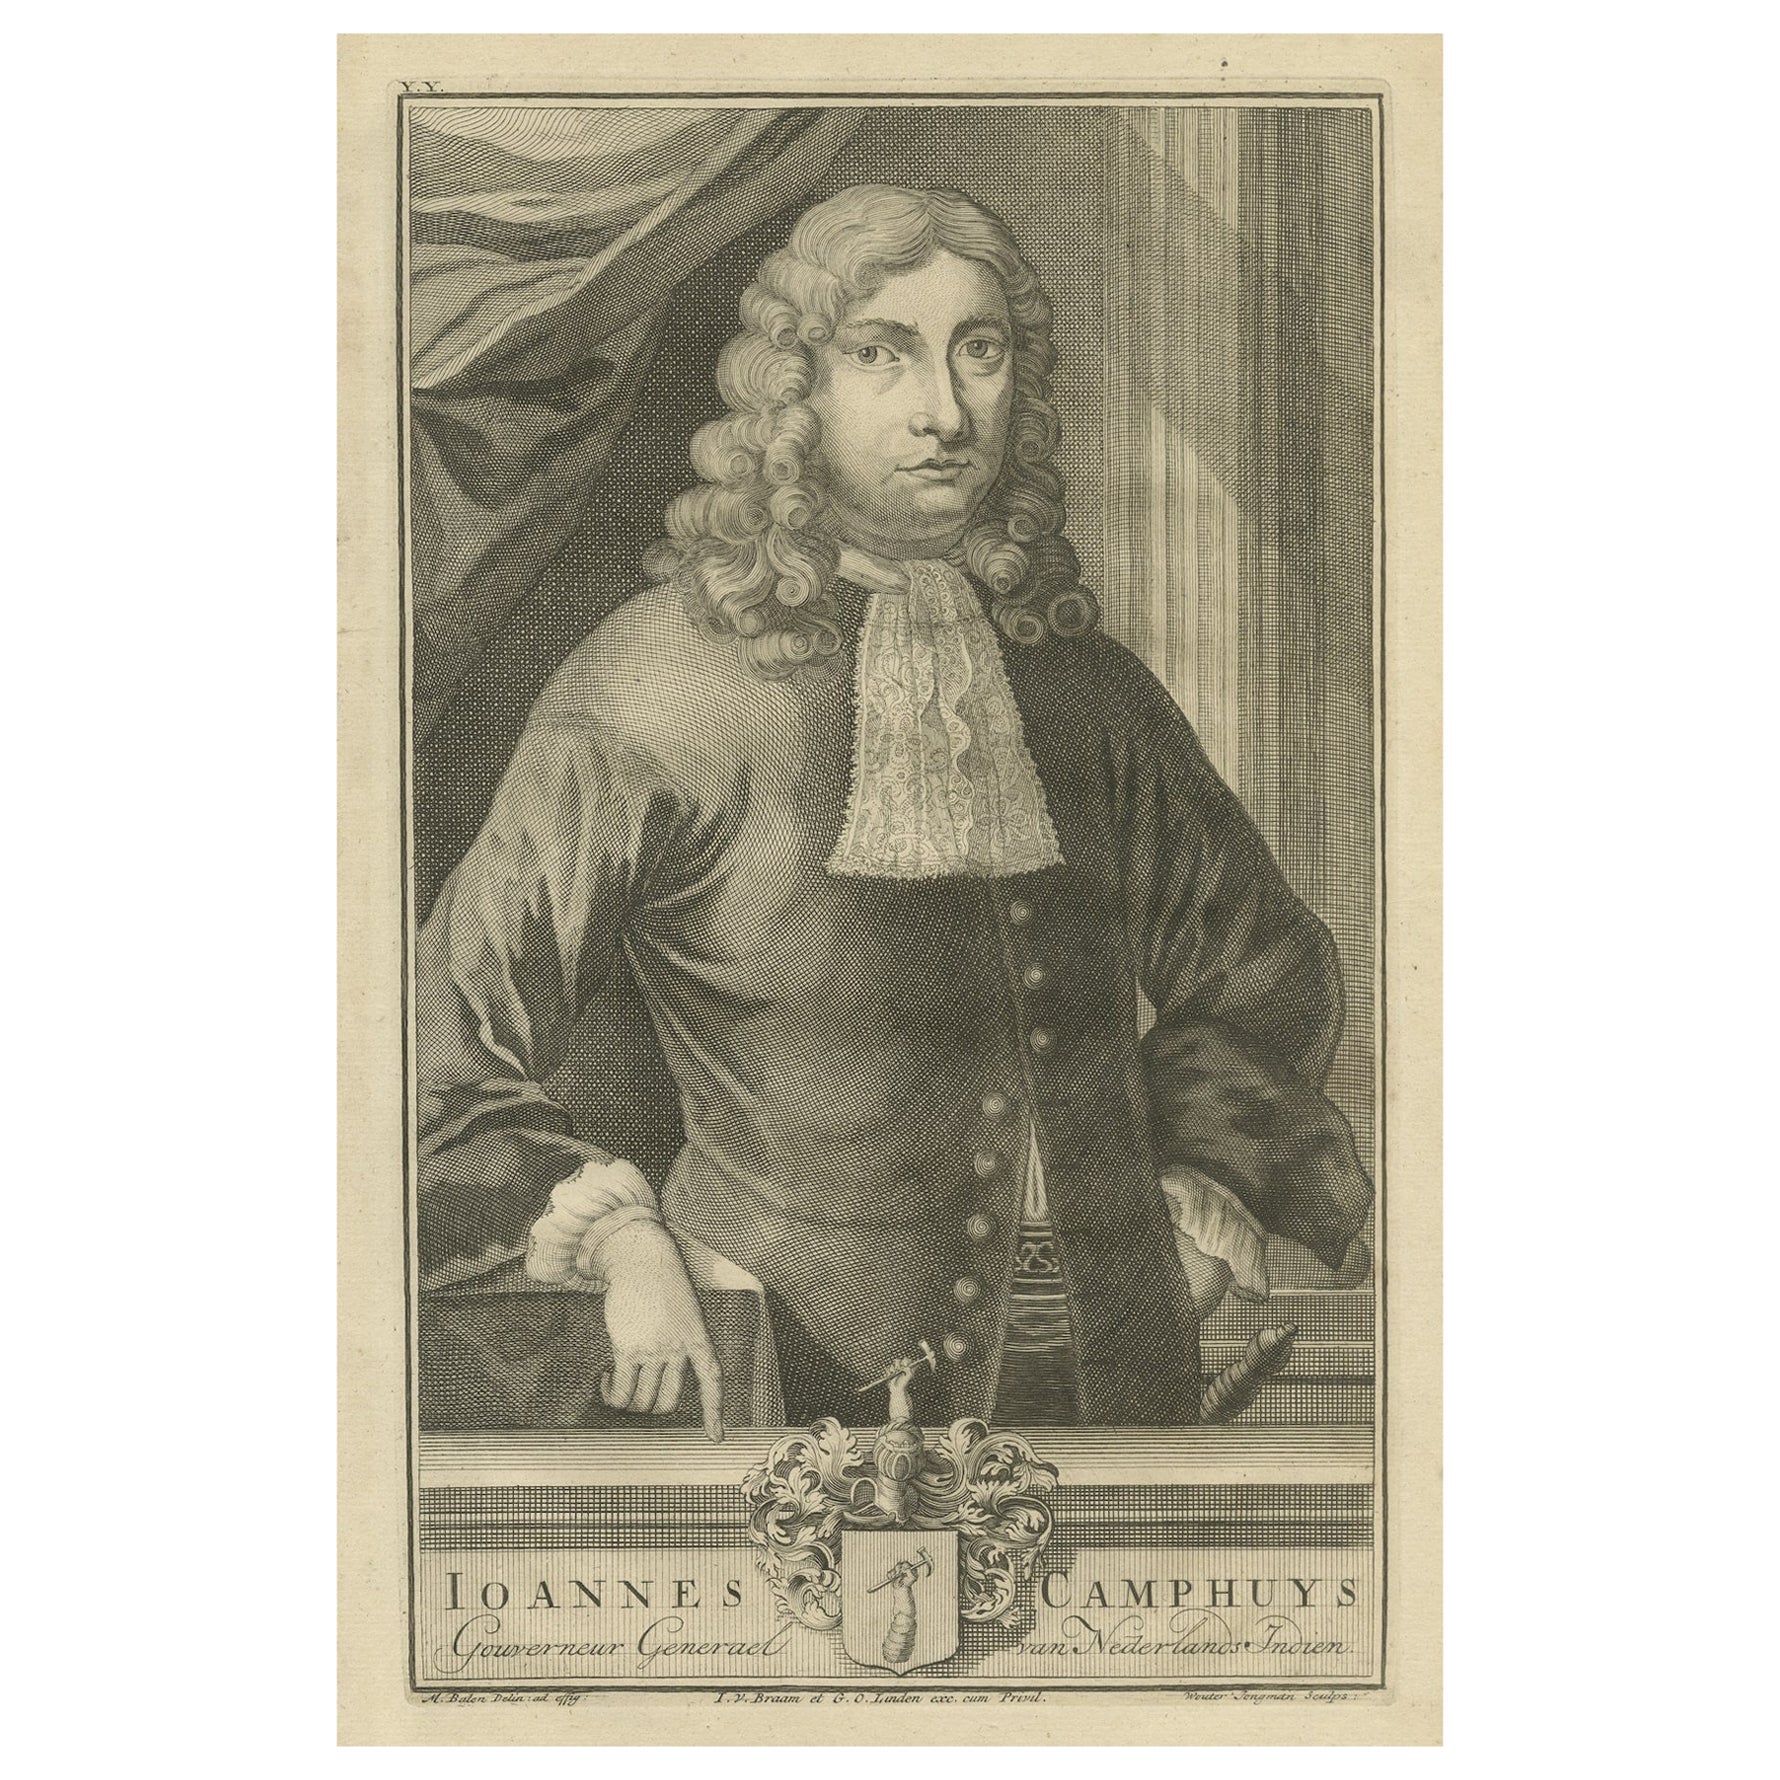 Ioannes Camphuys: Venerable Governor-General of the VOC, Dutch East Indies, 1724